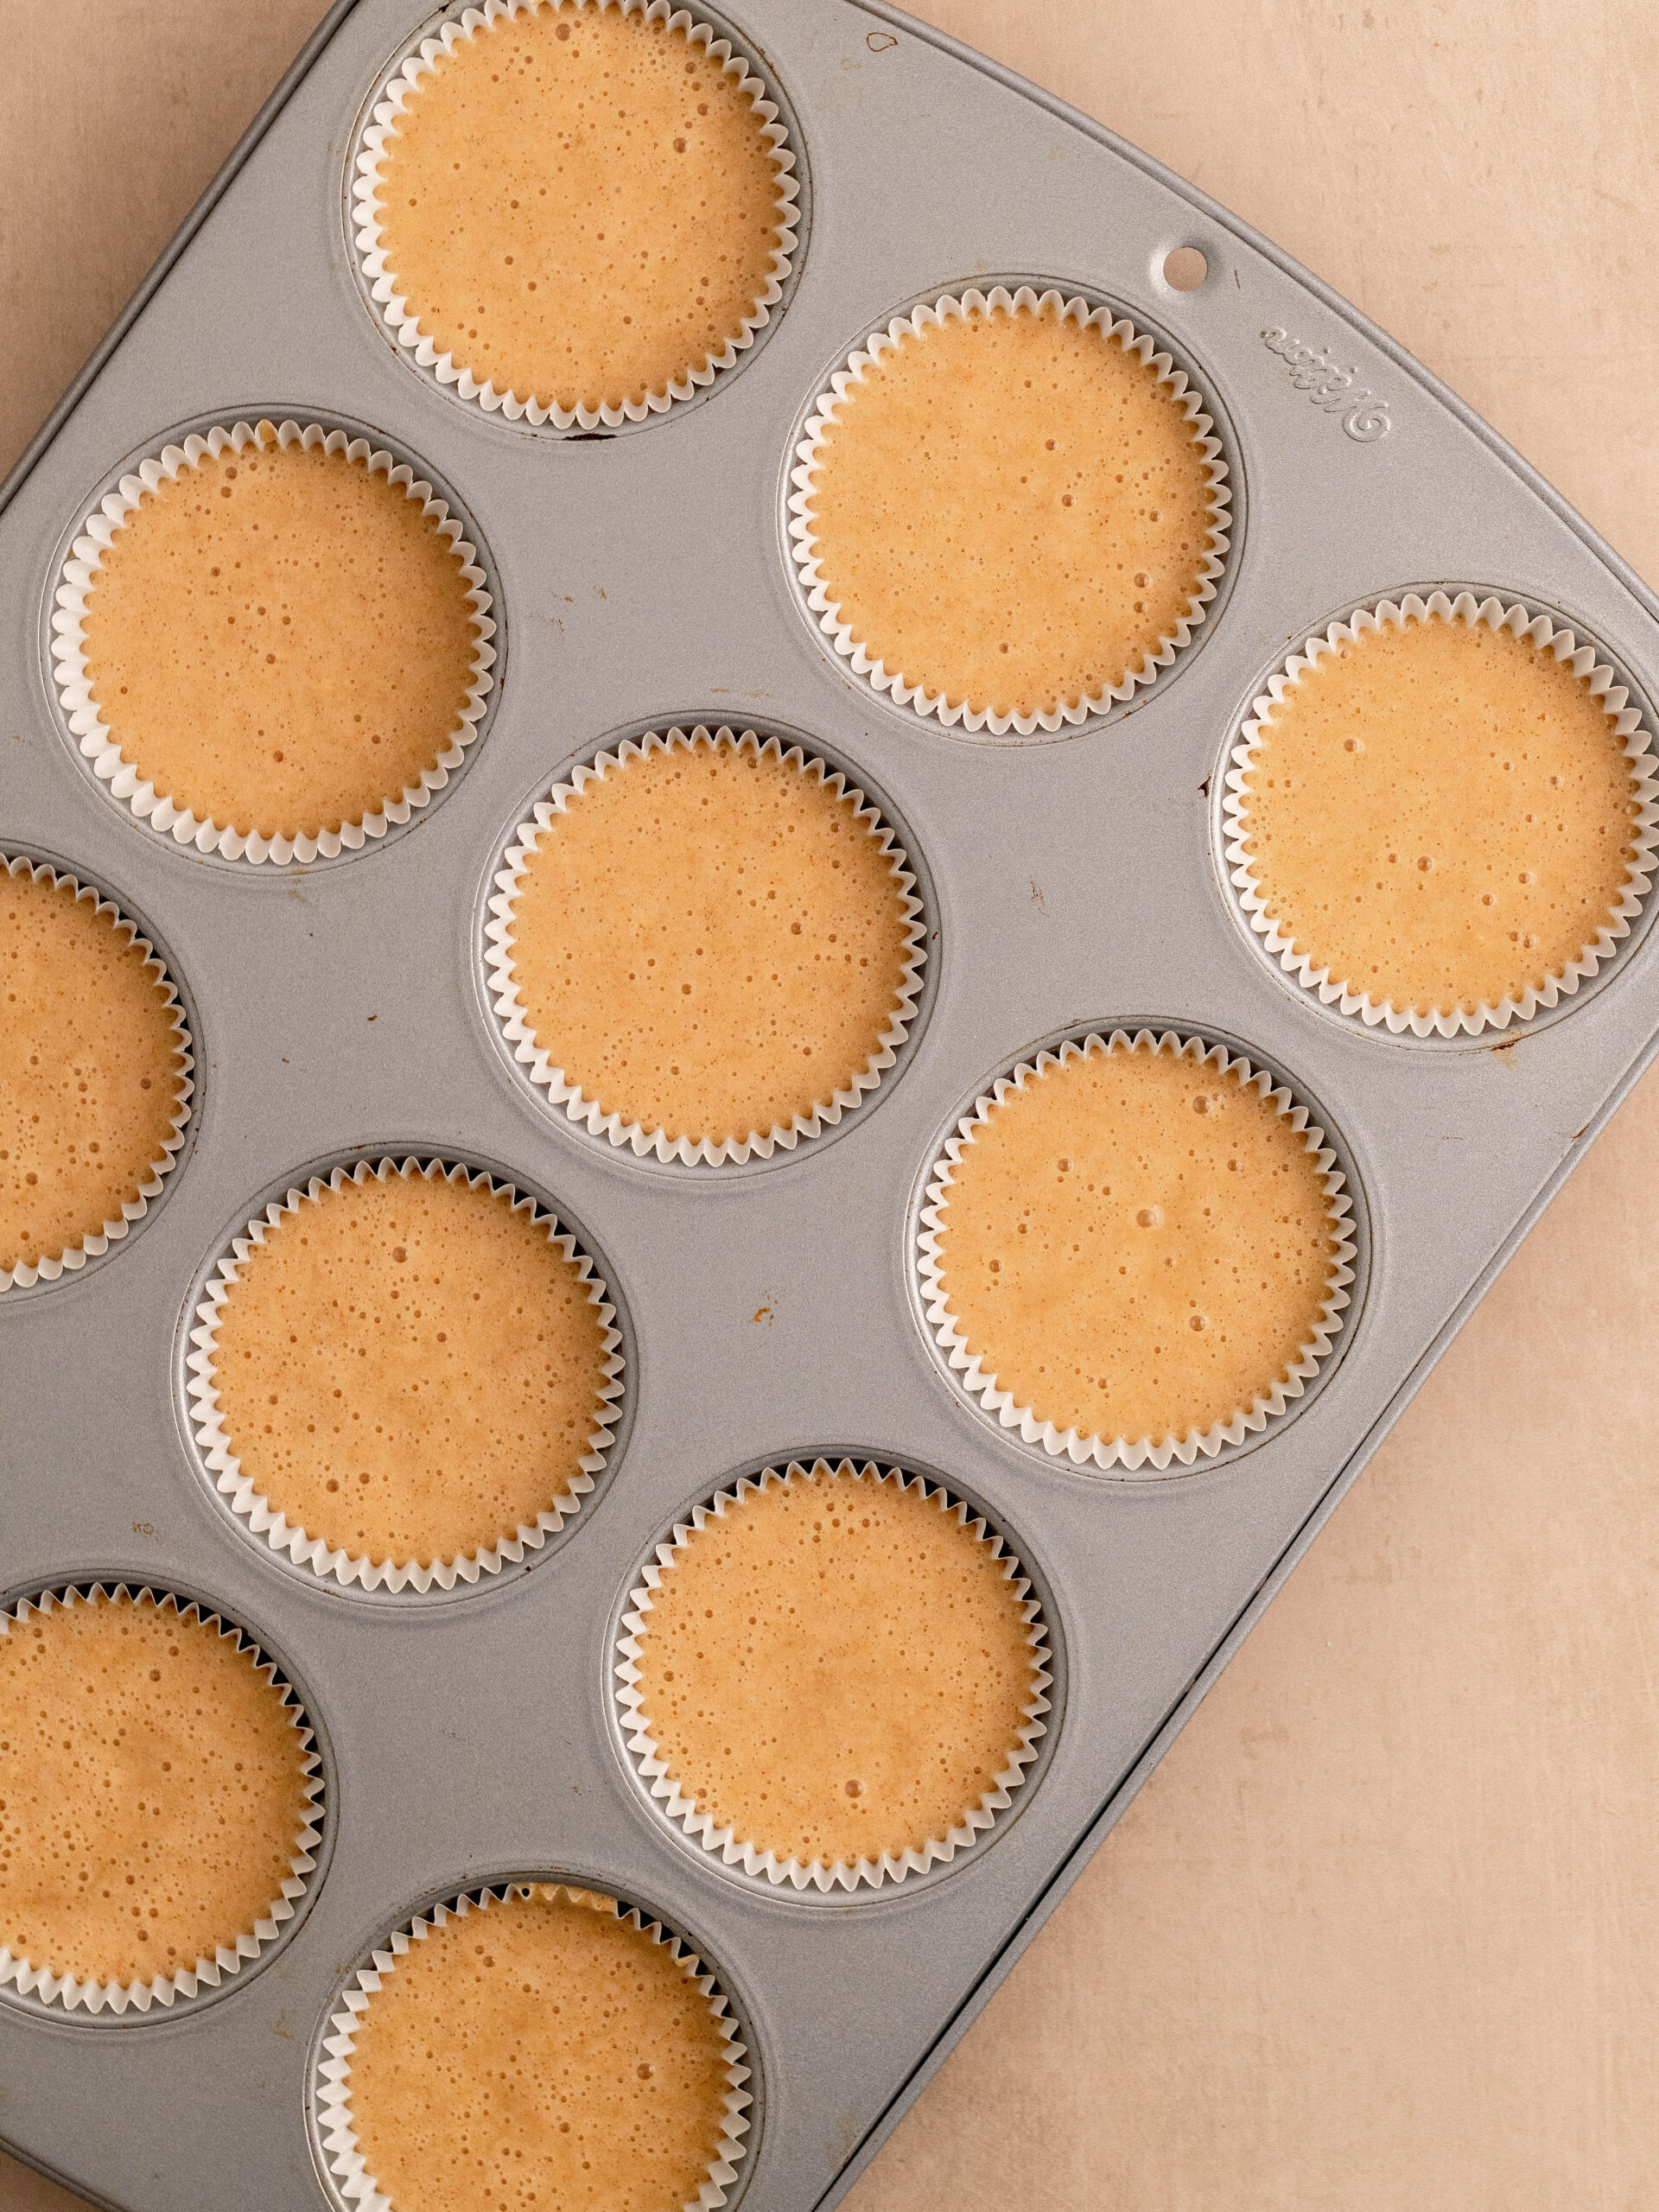 Step 7: Divide the batter into 12 cupcake liners and bake them